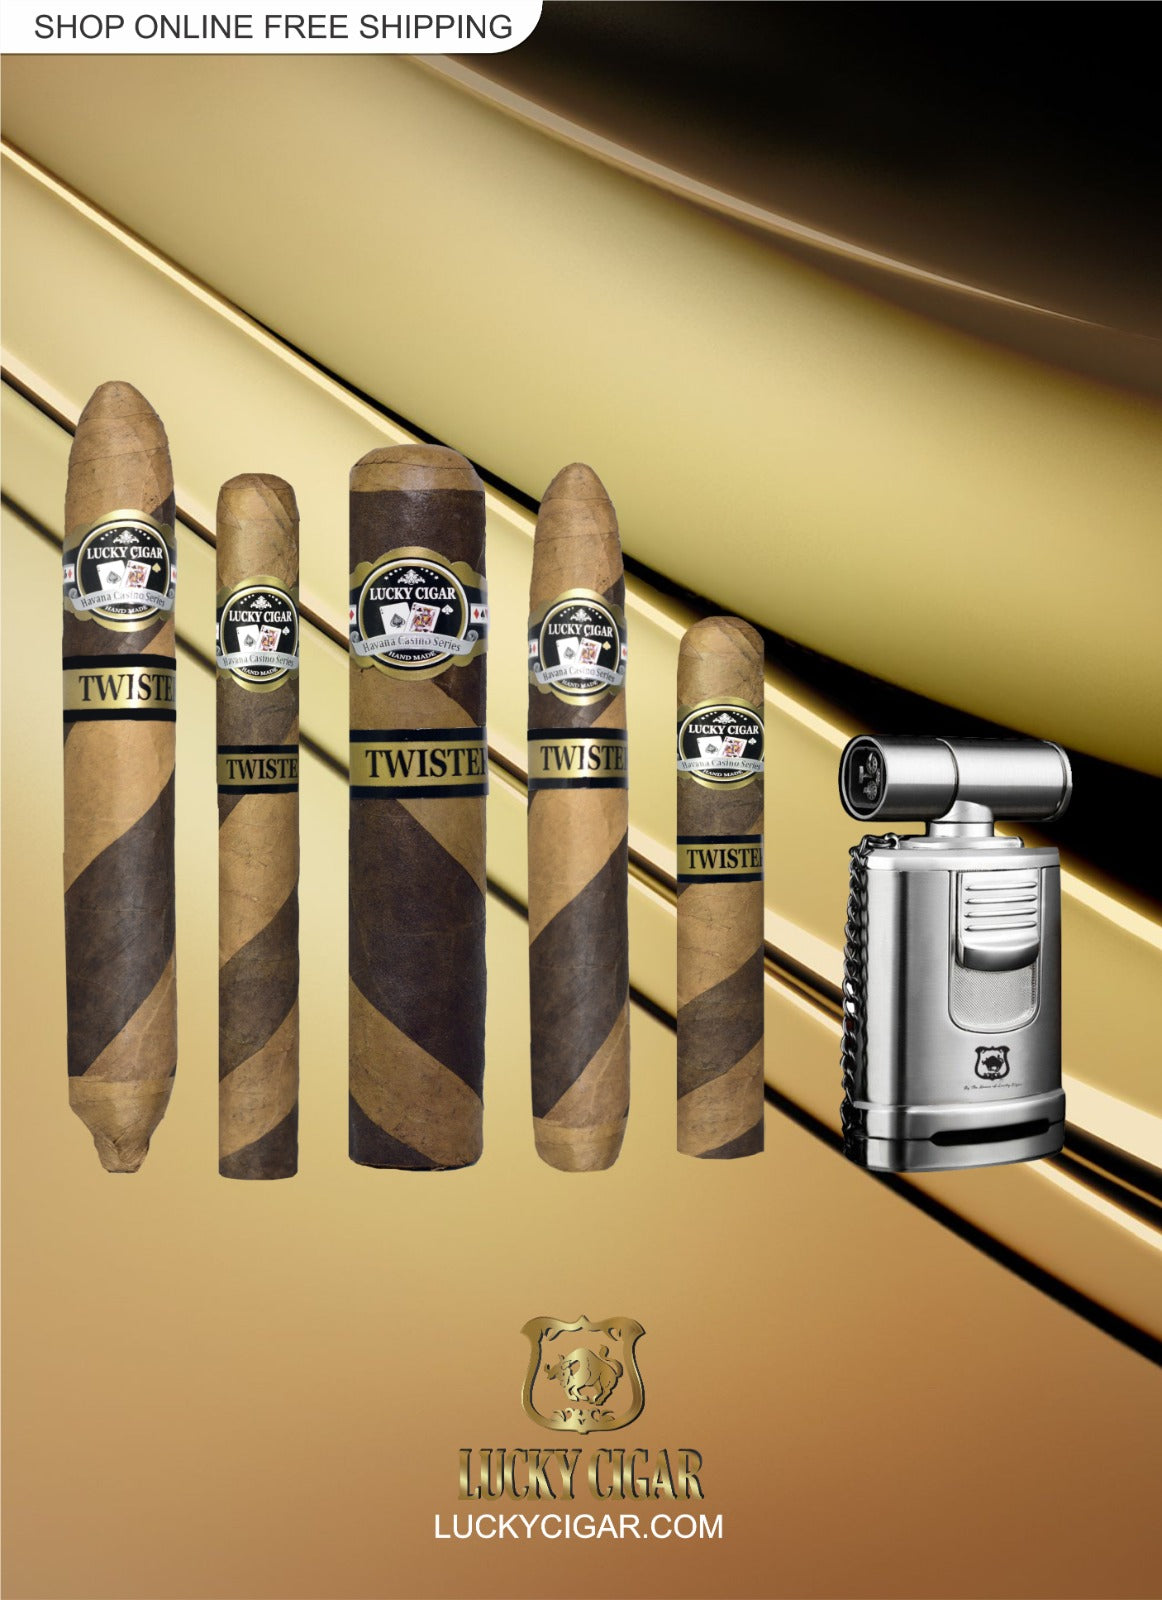 Lucky Cigar Sampler Sets: Set of 5 Twister Cigars with Table Torch 5 Twister cigars: Robusto, Gordo, Solomon, Churchill, Torpedo